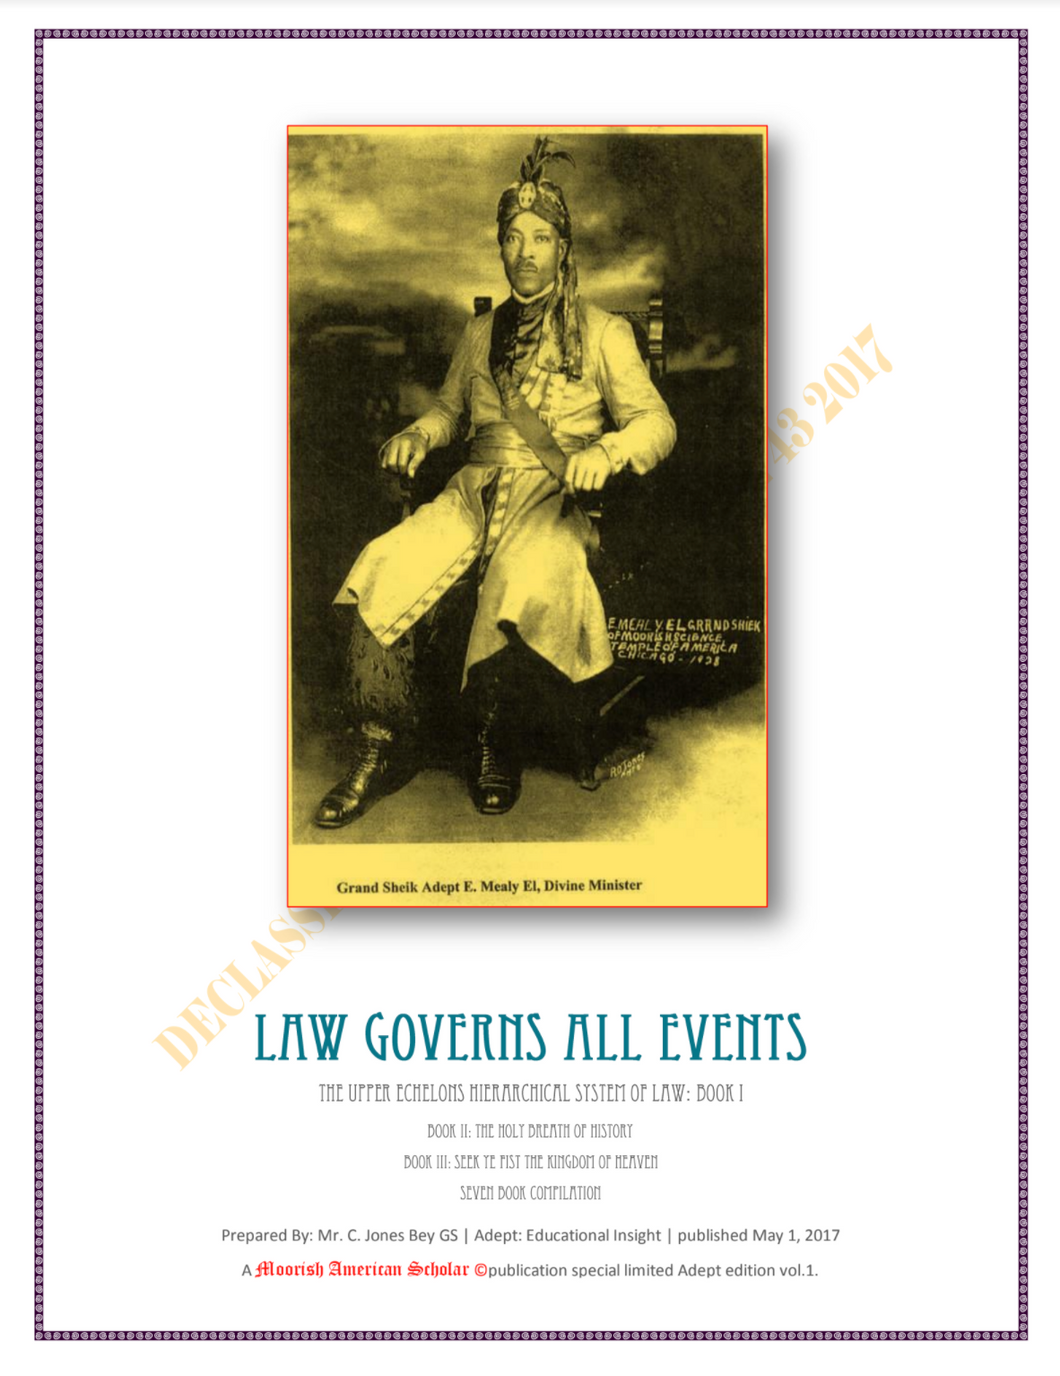 Law Governs All Events - GS. E. Mealy EL (PDF)